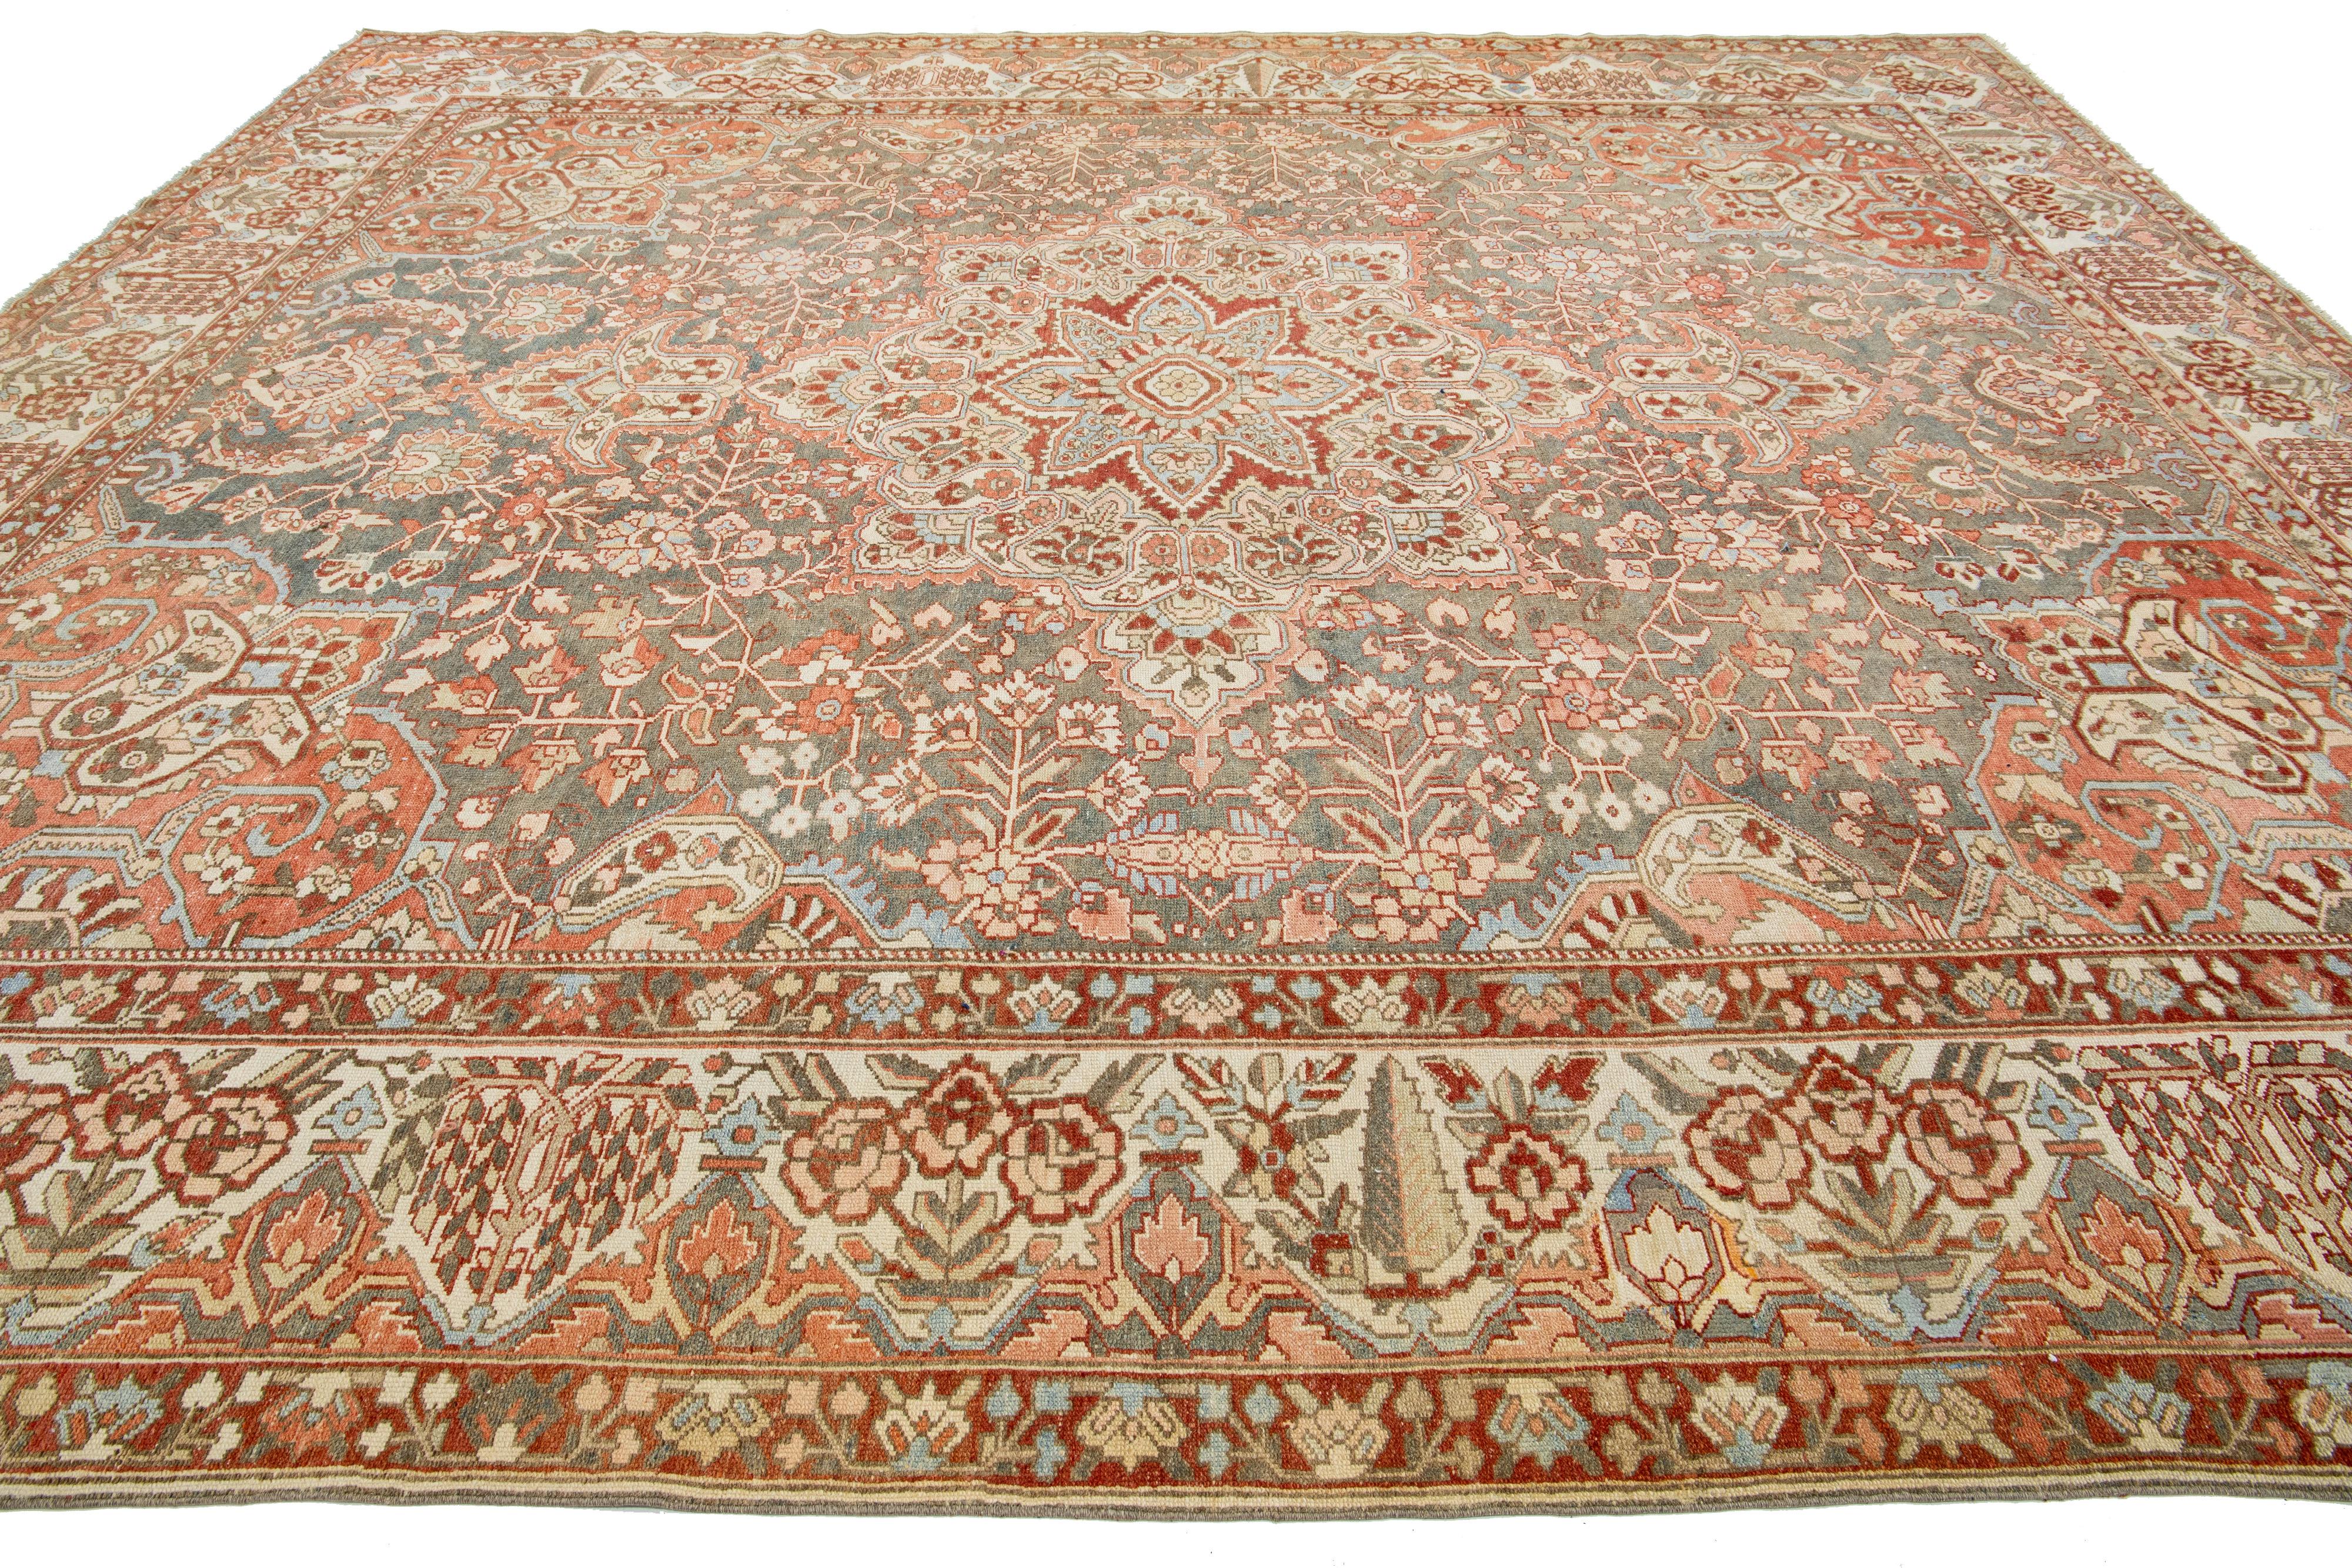 Hand-Knotted Peach Persian Medallion Bakhtiari Wool Rug was handcrafted in the 1920s For Sale